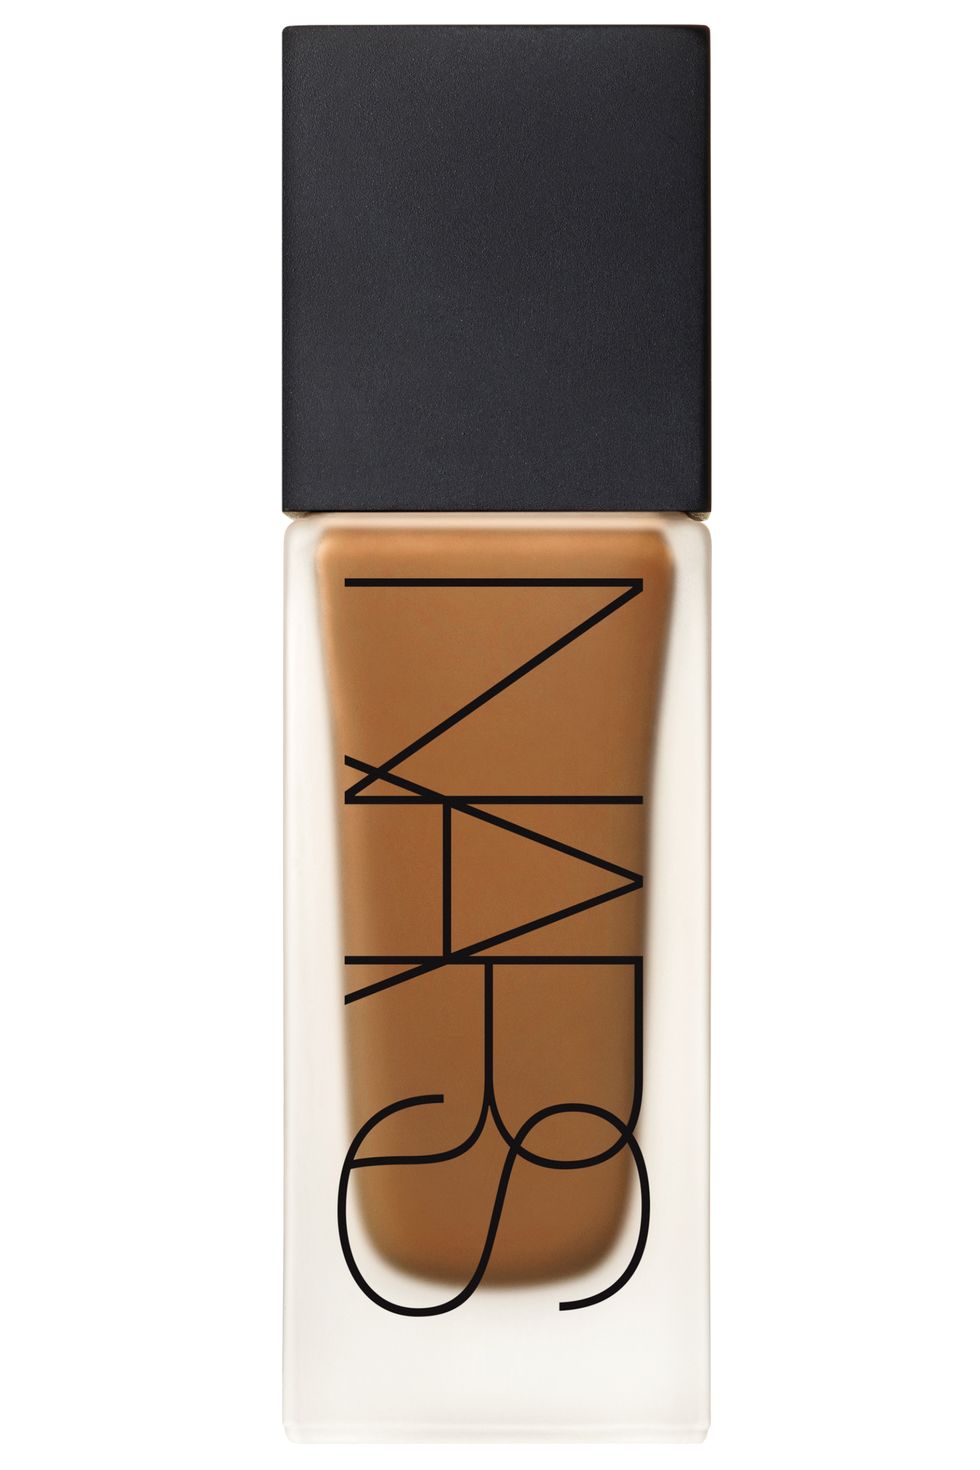 <p>This brightening, full coverage formula immediately hides all evidence of redness or dullness.</p><p><strong>NARS</strong> All Day Luminous Weightless Foundation, $48, <a href="http://www.sephora.com/all-day-luminous-weightless-foundation-P393658" target="_blank">sephora.com</a>.</p>